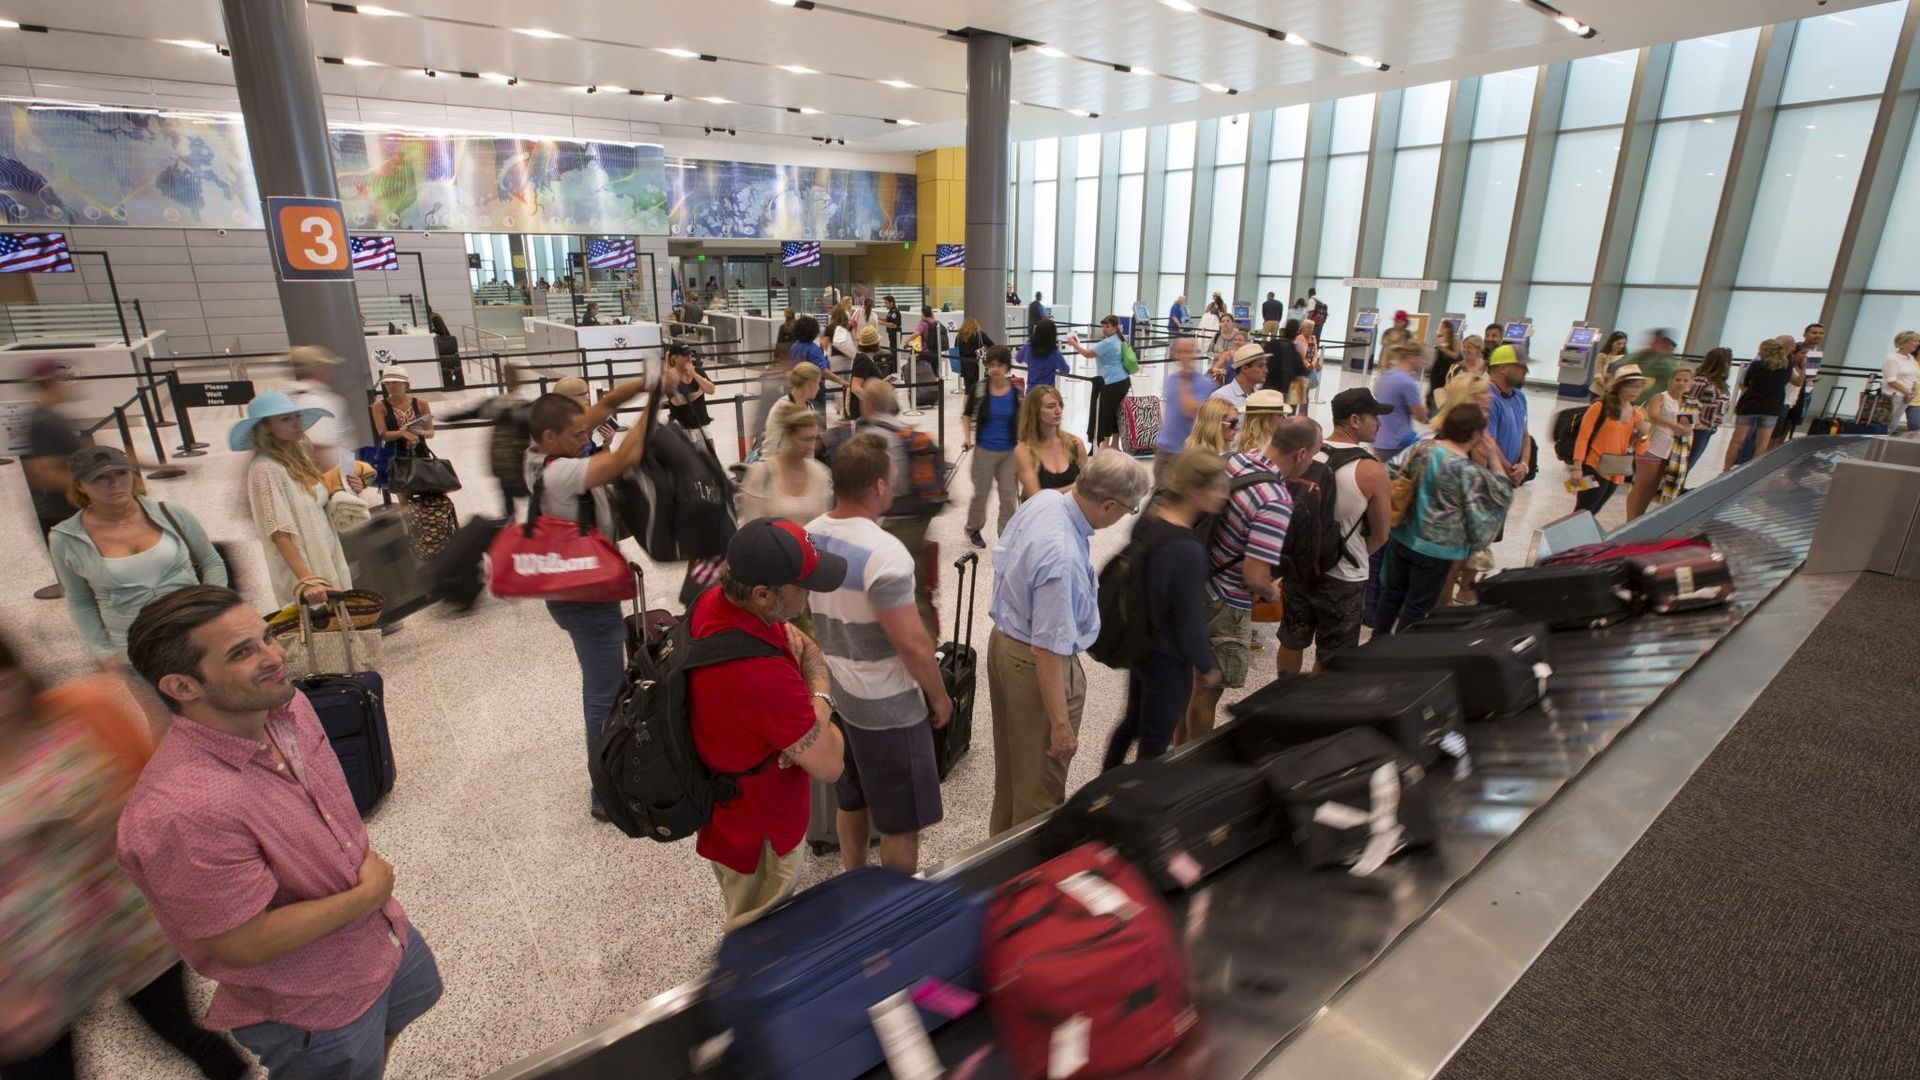 People await baggage at the Austin airport. Photo courtesy AUS.